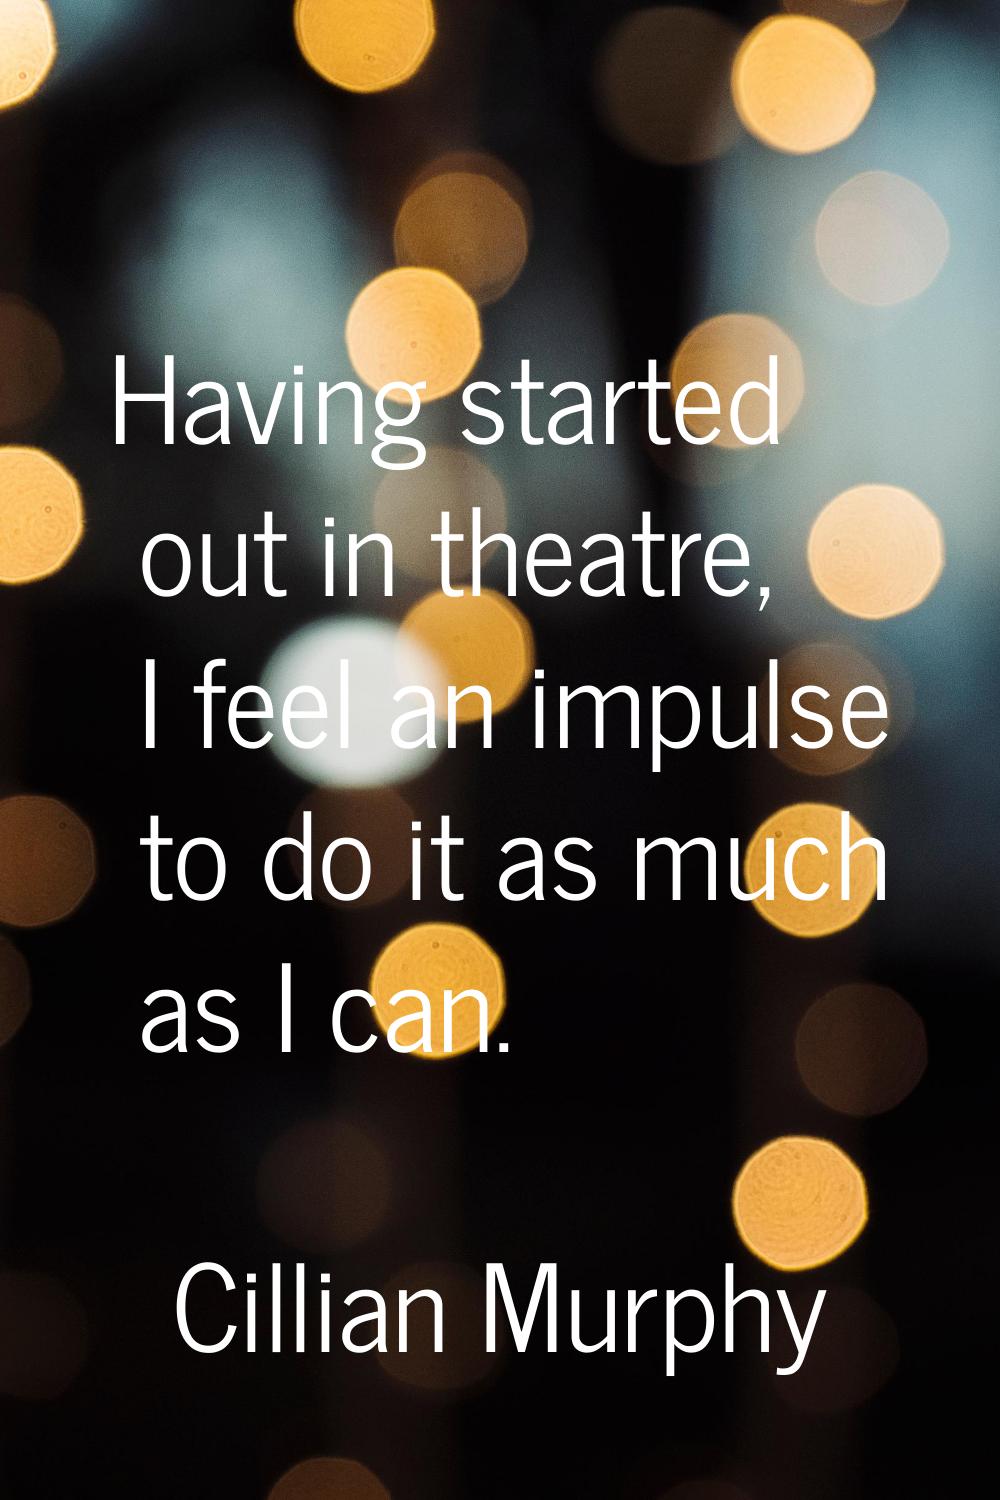 Having started out in theatre, I feel an impulse to do it as much as I can.